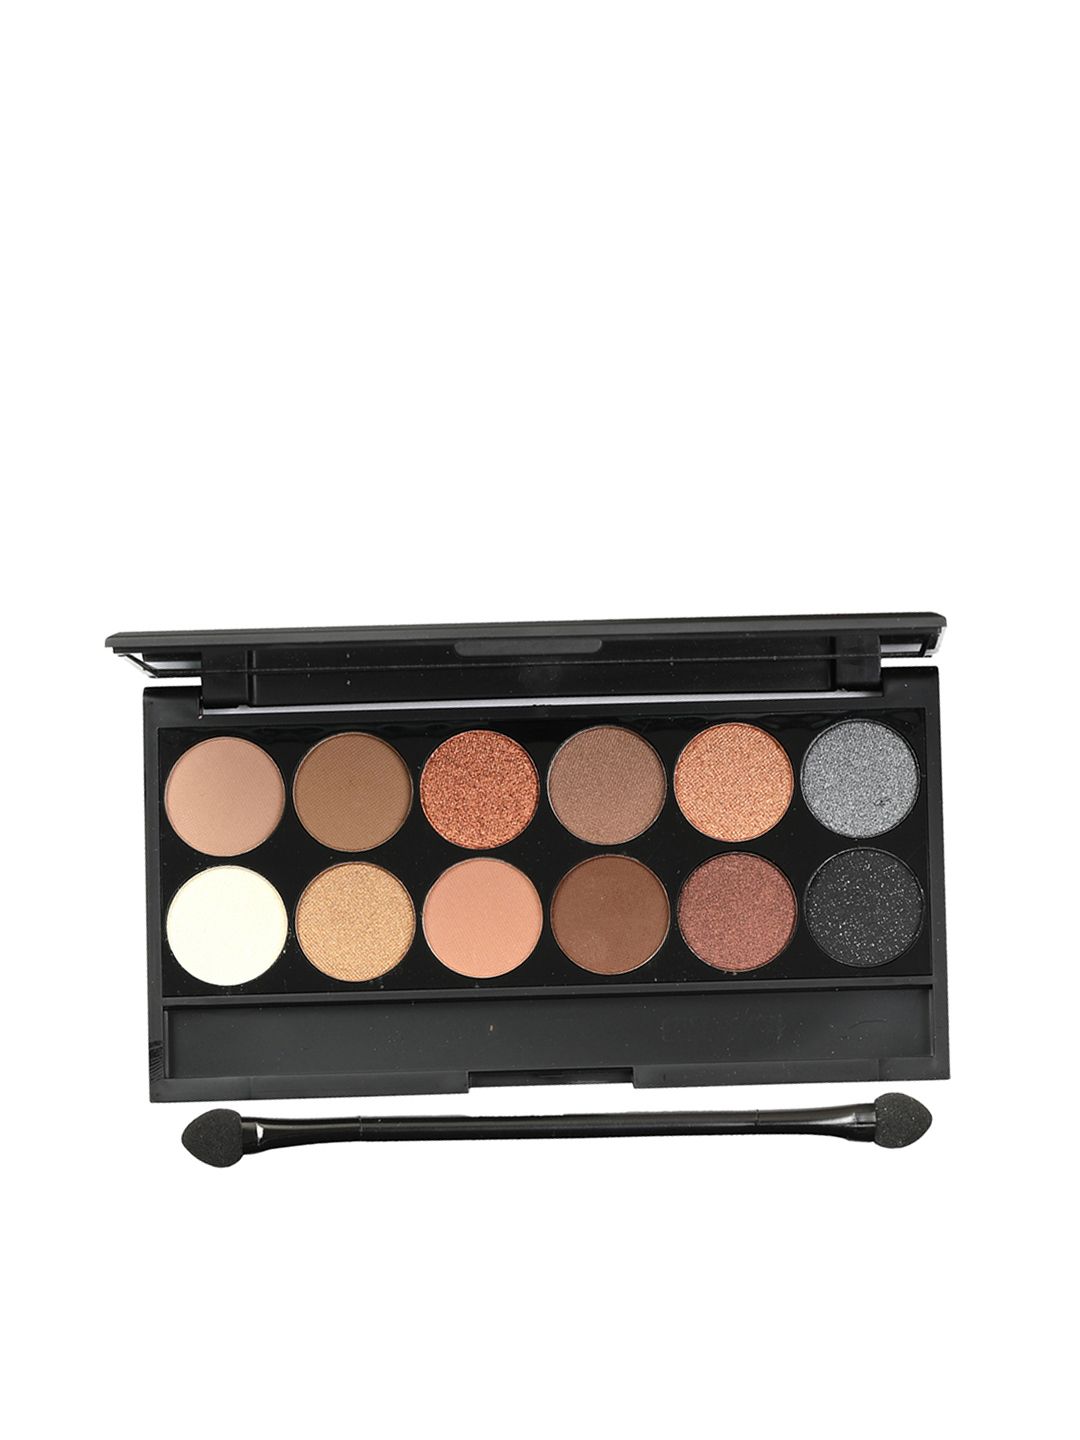 SWISS BEAUTY 12 Color Ultra Professional Eyeshadow Palette - 03 Price in India